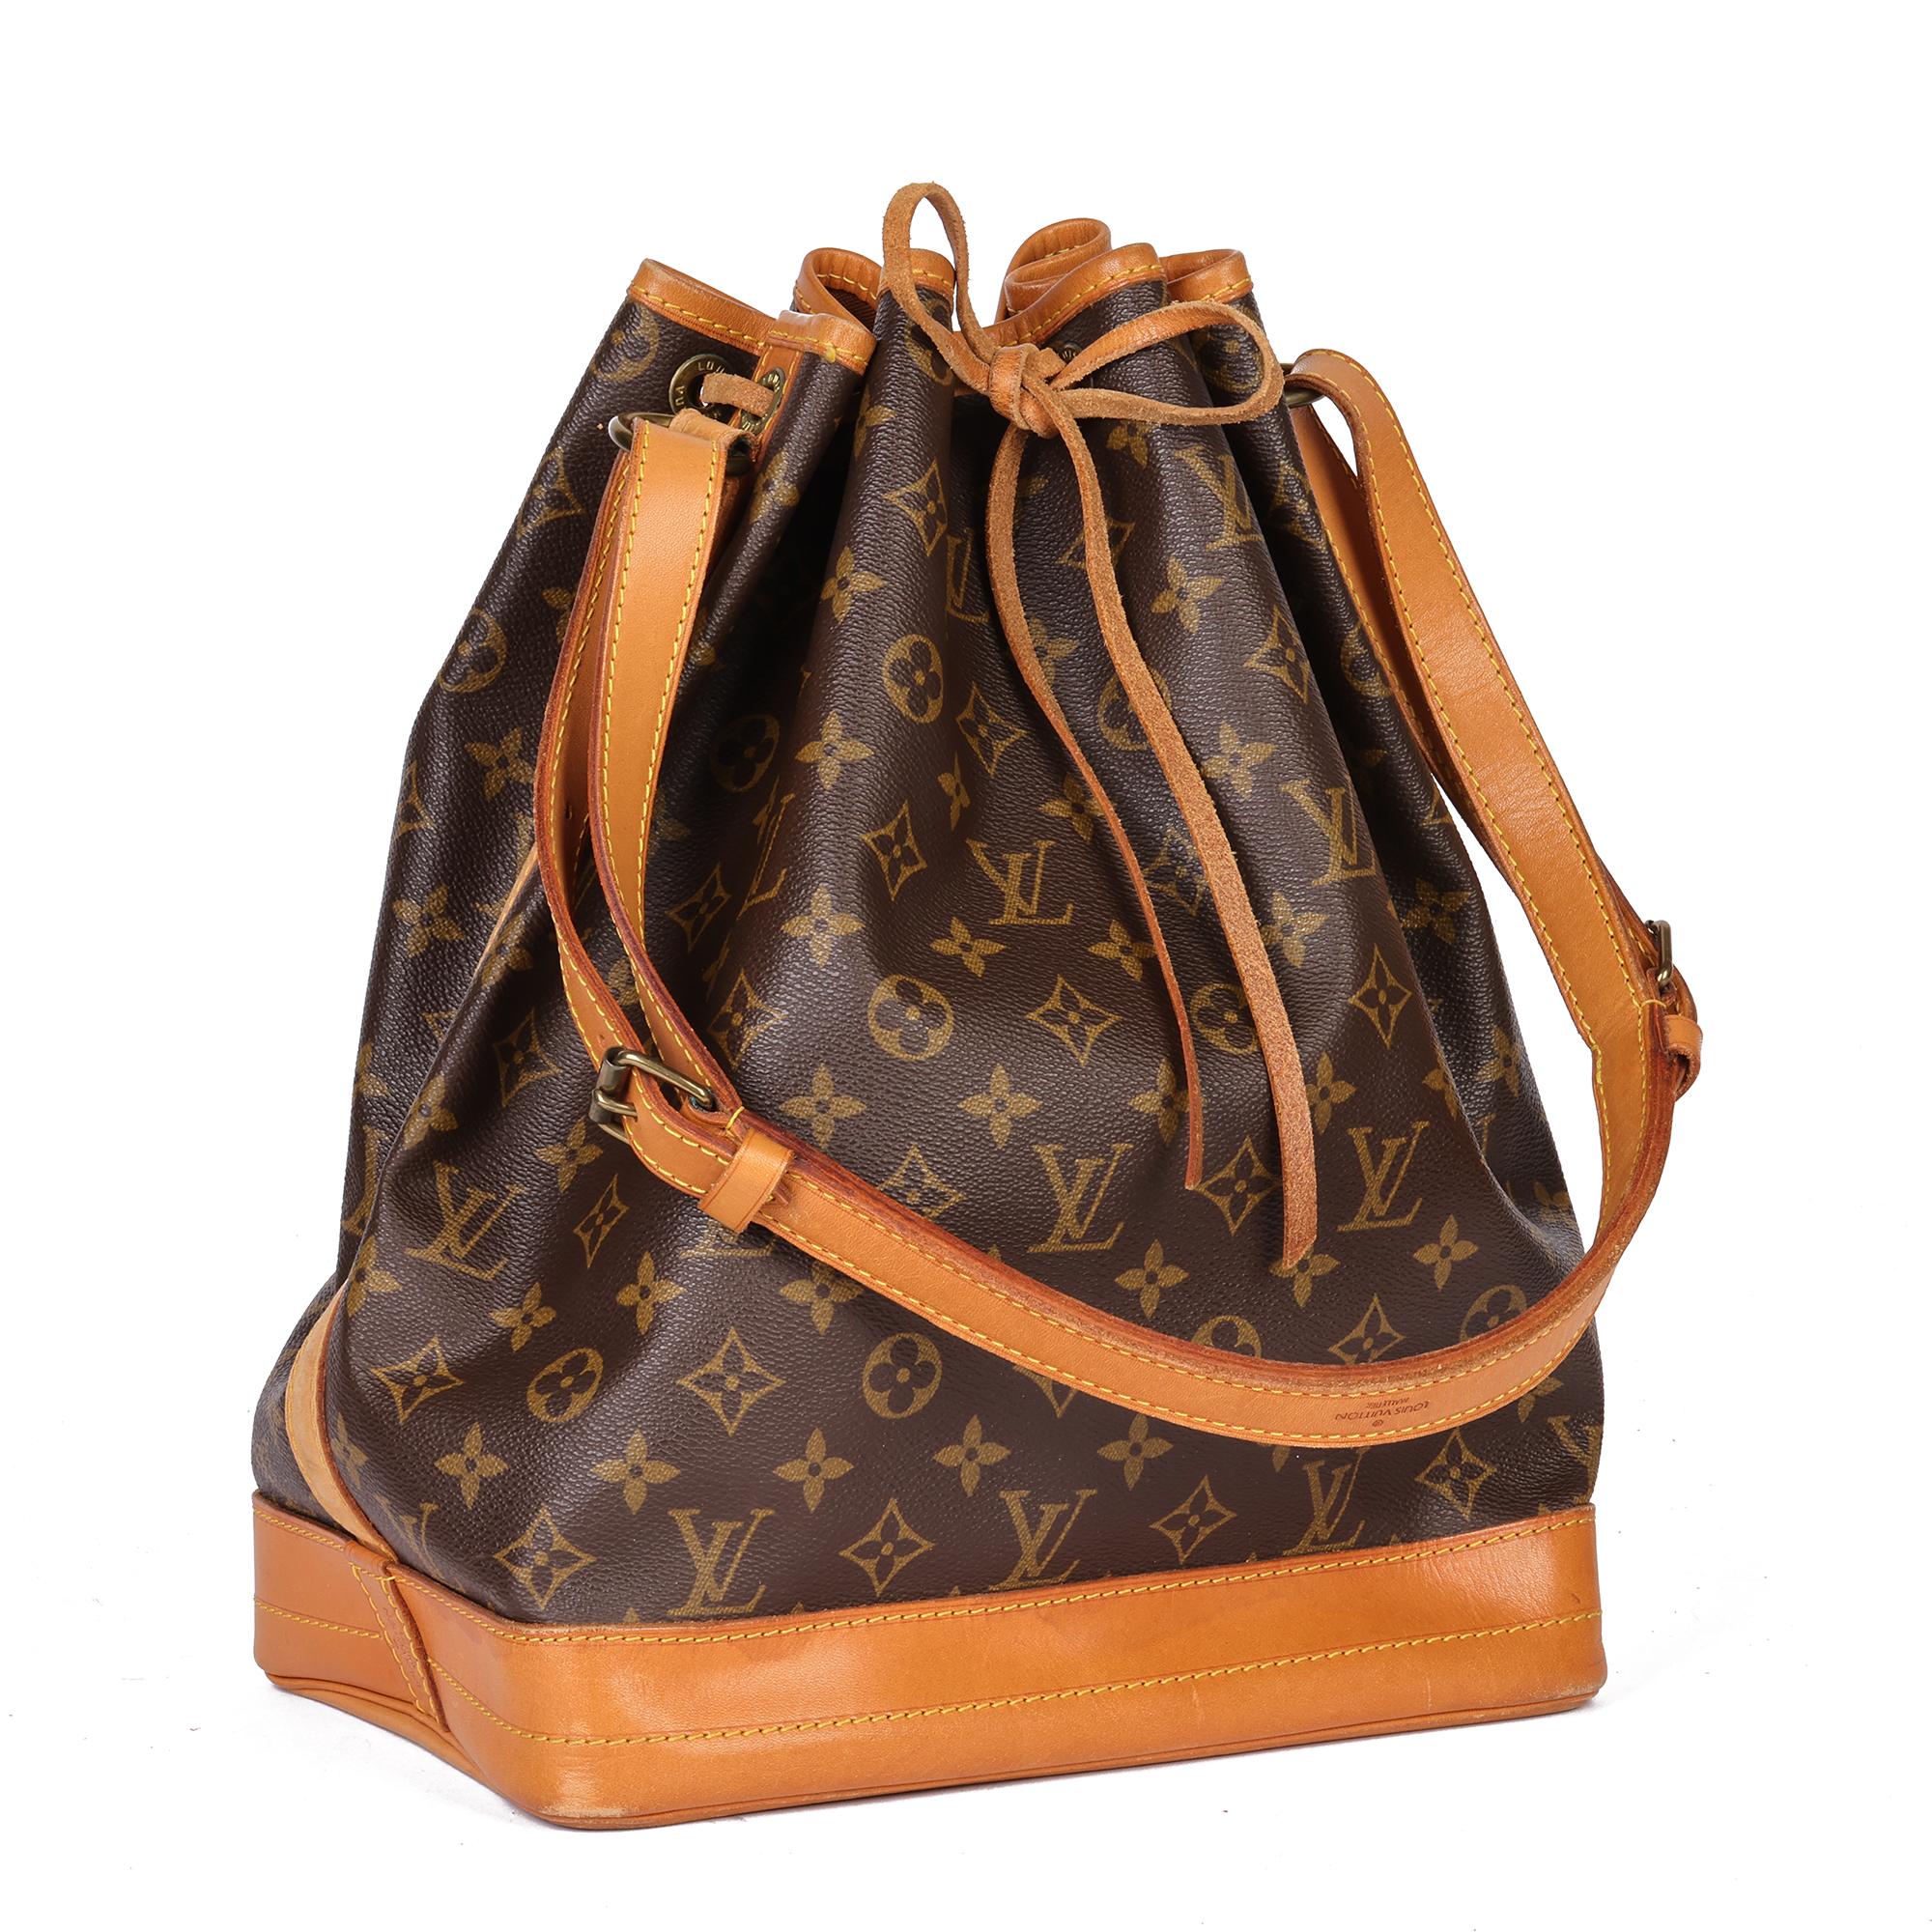 LOUIS VUITTON
Brown Monogram Coated Canvas & Vachetta Leather Vintage Noé

Xupes Reference: HB4805
Serial Number: FH0910
Age (Circa): 1990
Authenticity Details: Date Stamp (Made in France)
Gender: Ladies
Type: Shoulder

Colour: Brown
Hardware: